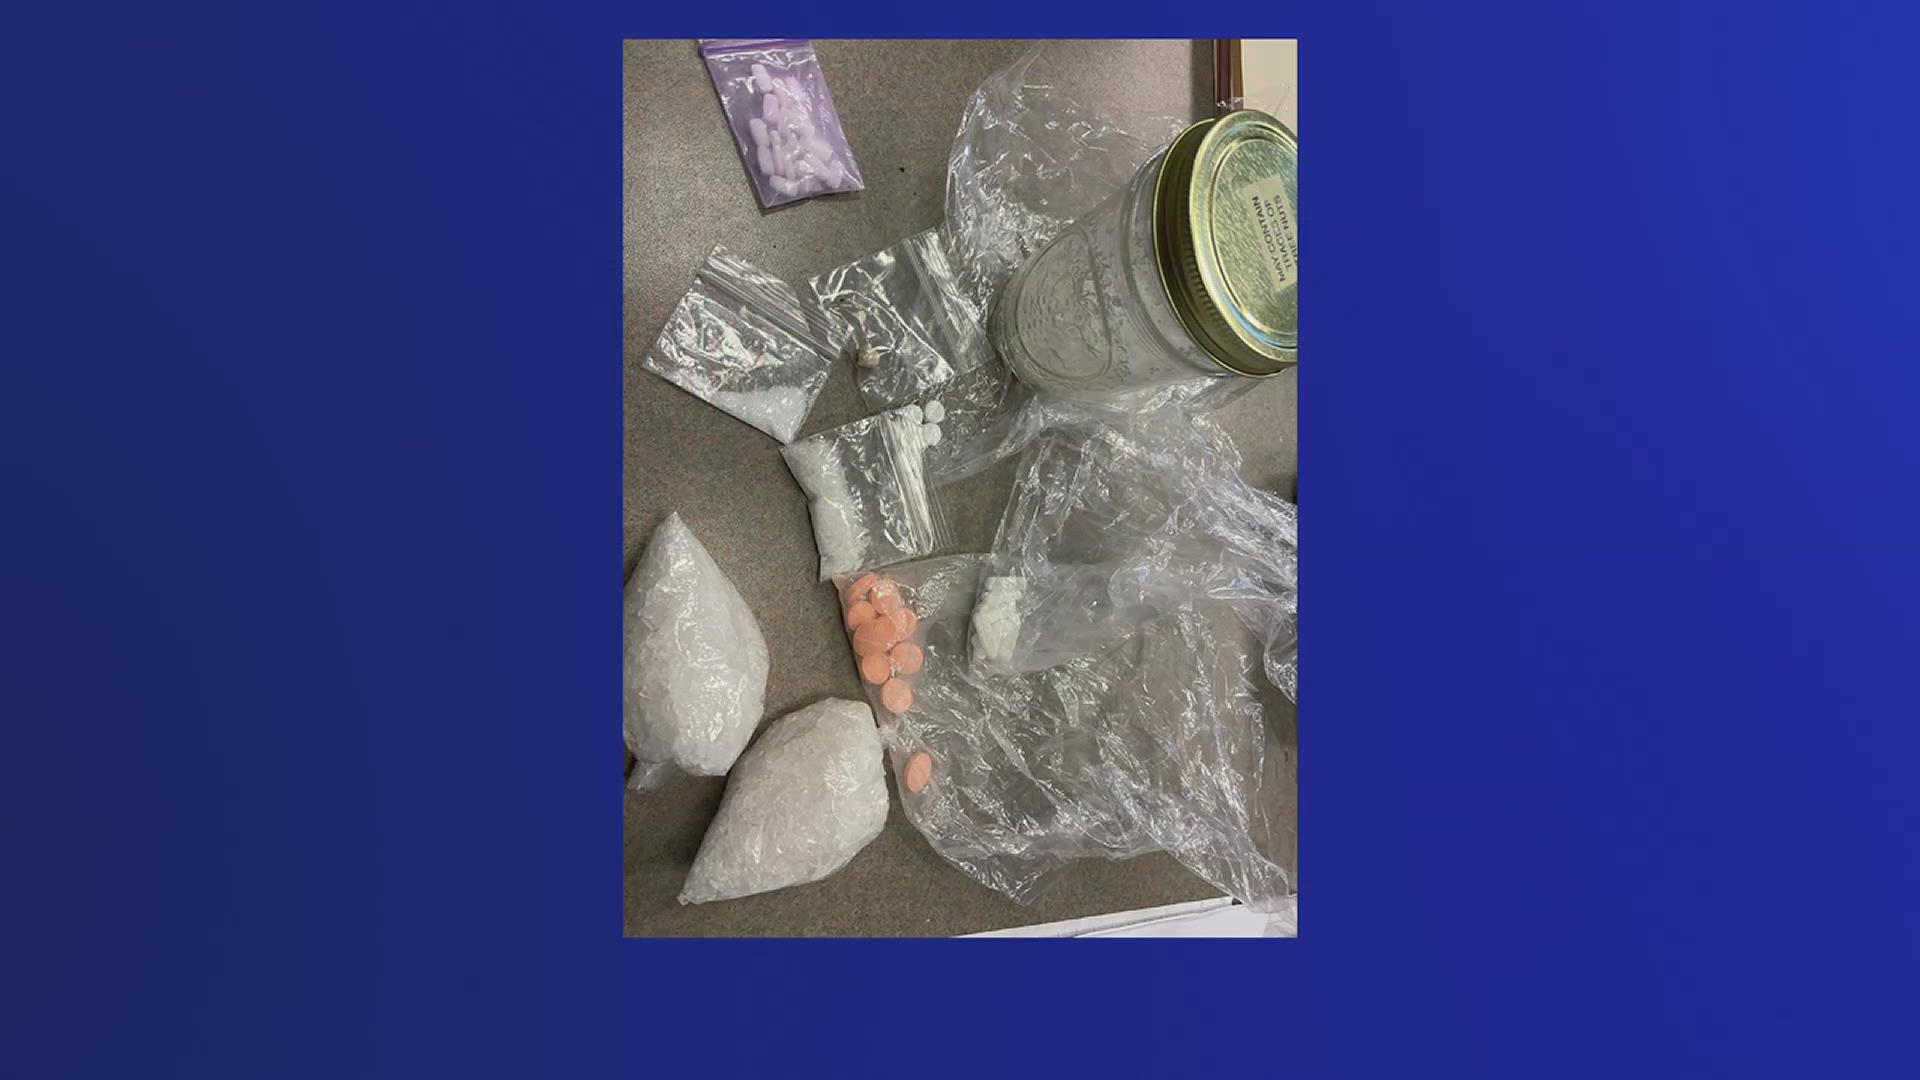 During a traffic stop, David Broussard, 53, was found to be in possession of about 75 grams of methamphetamine, along with other narcotics.